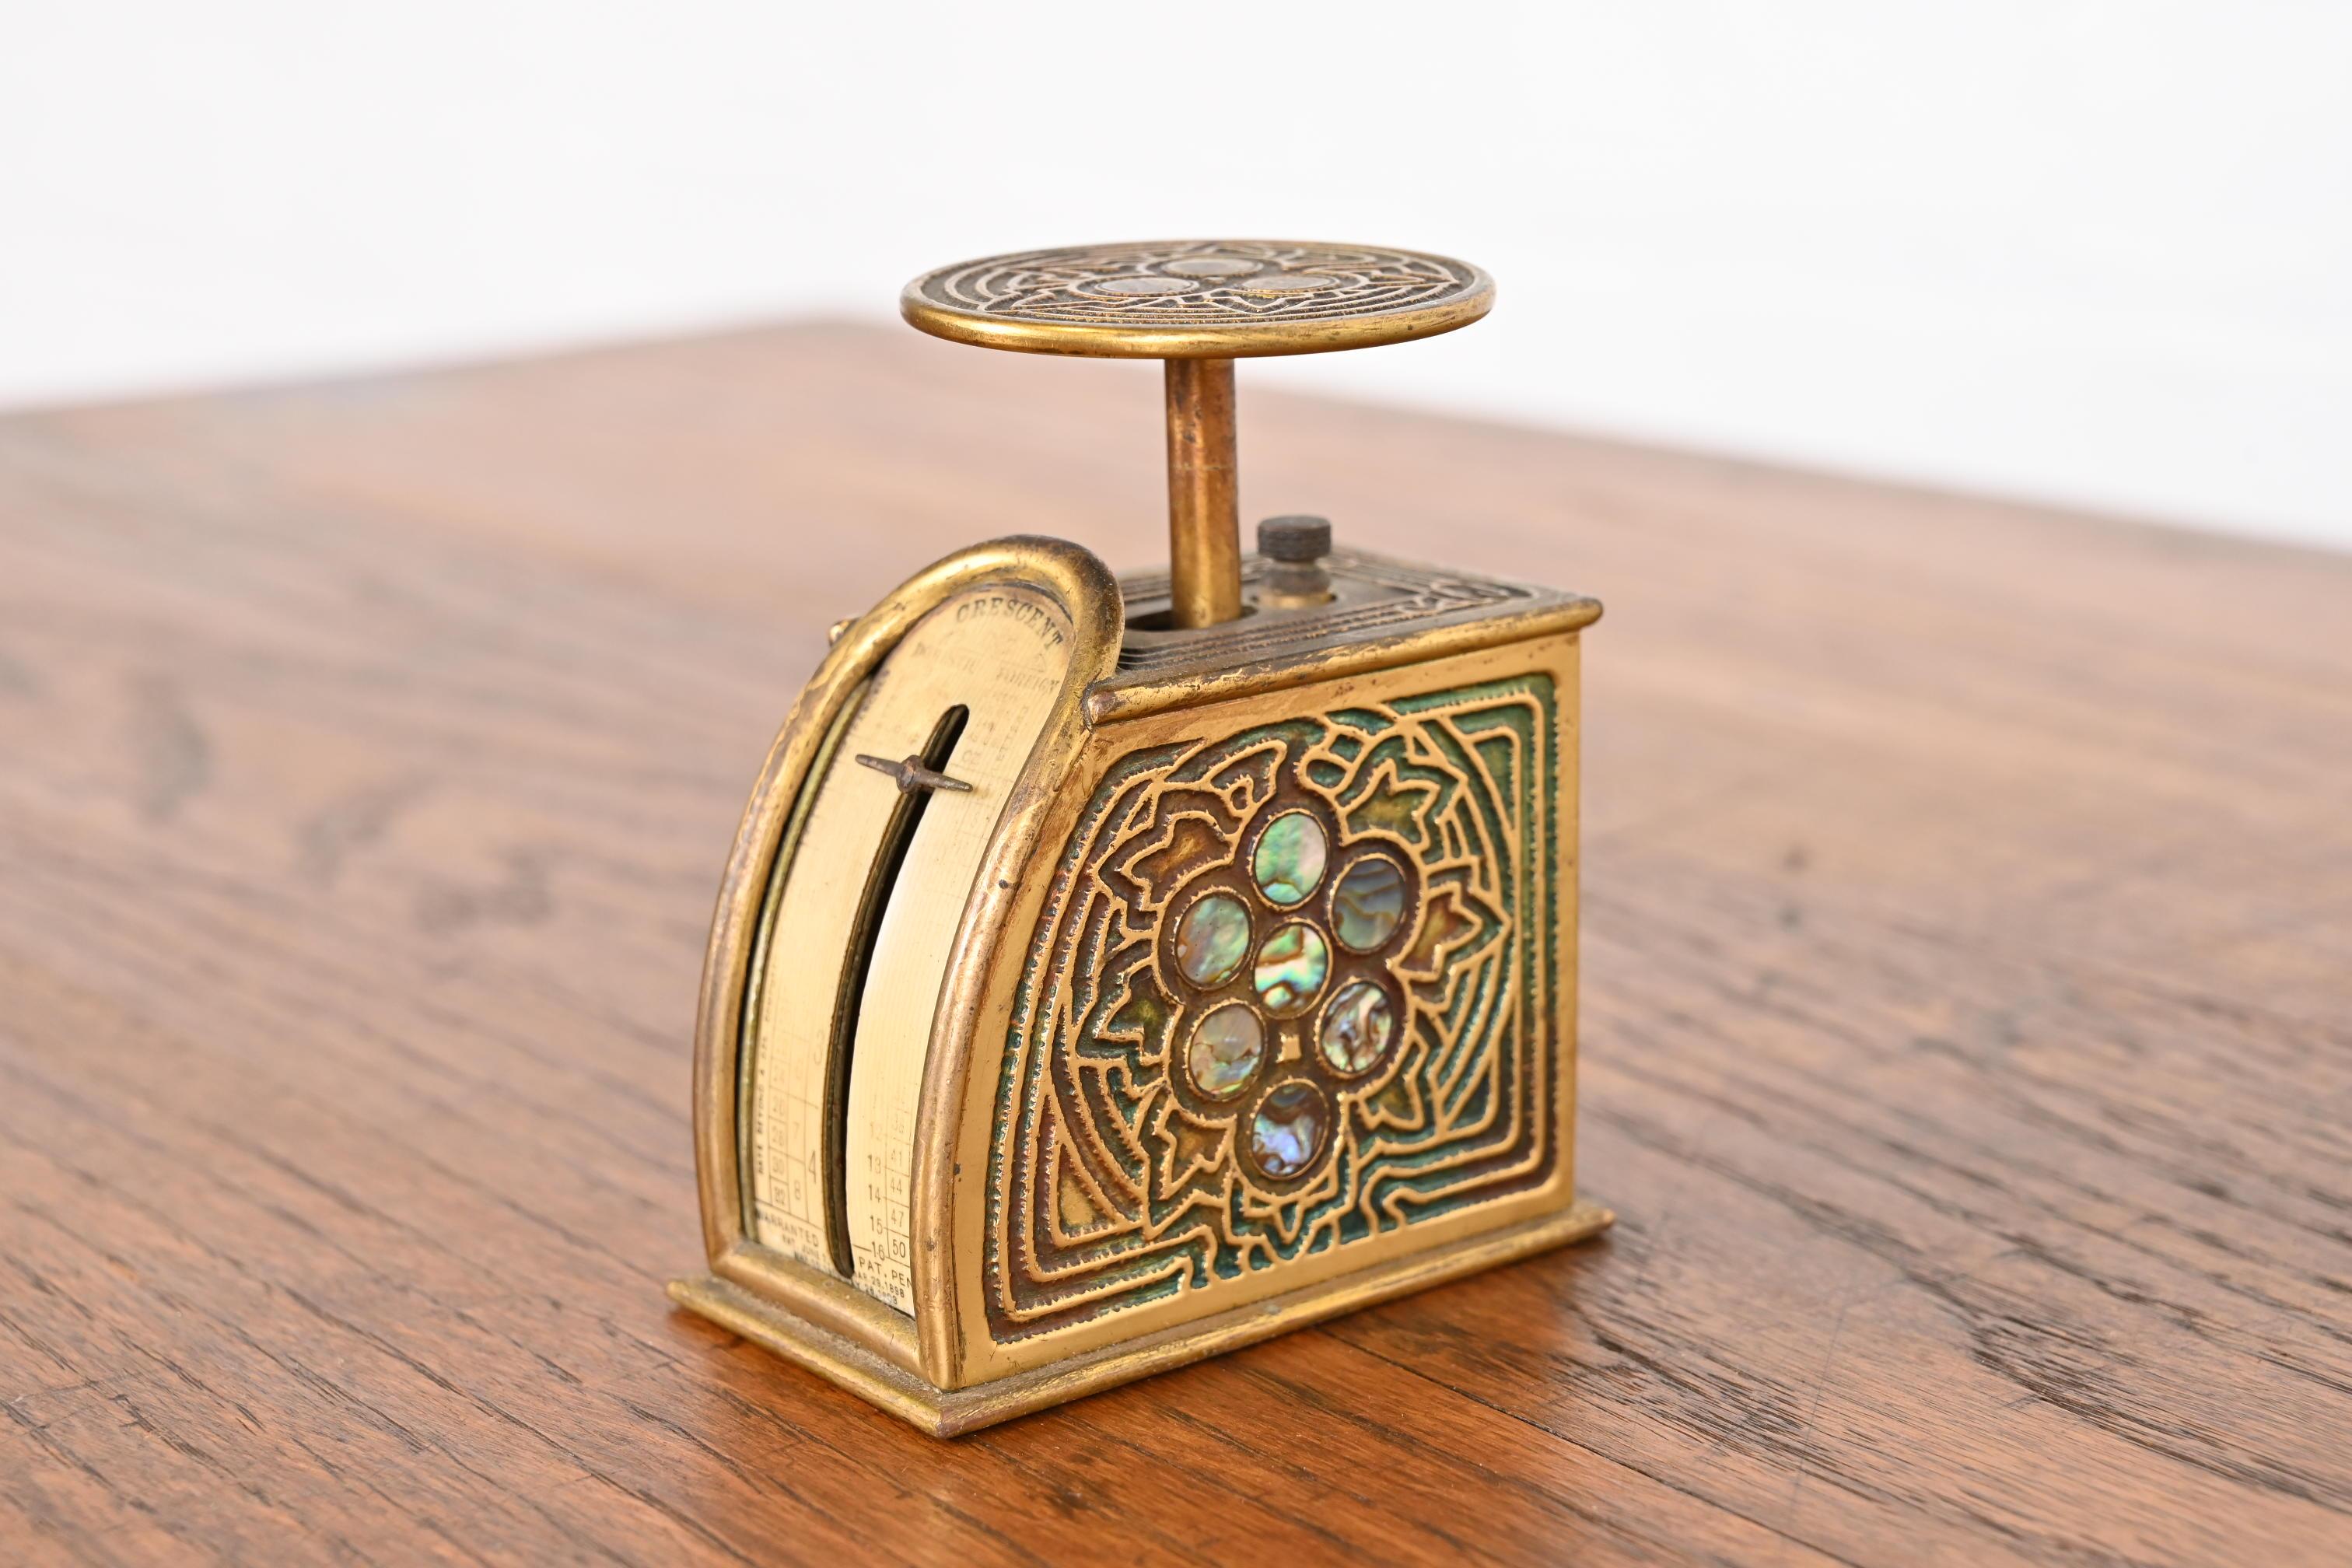 A gorgeous Art Nouveau or Art Deco period gilt bronze and inlaid abalone postage scale

By Tiffany Studios

New York, USA, Early 20th Century

Measures: 1.63